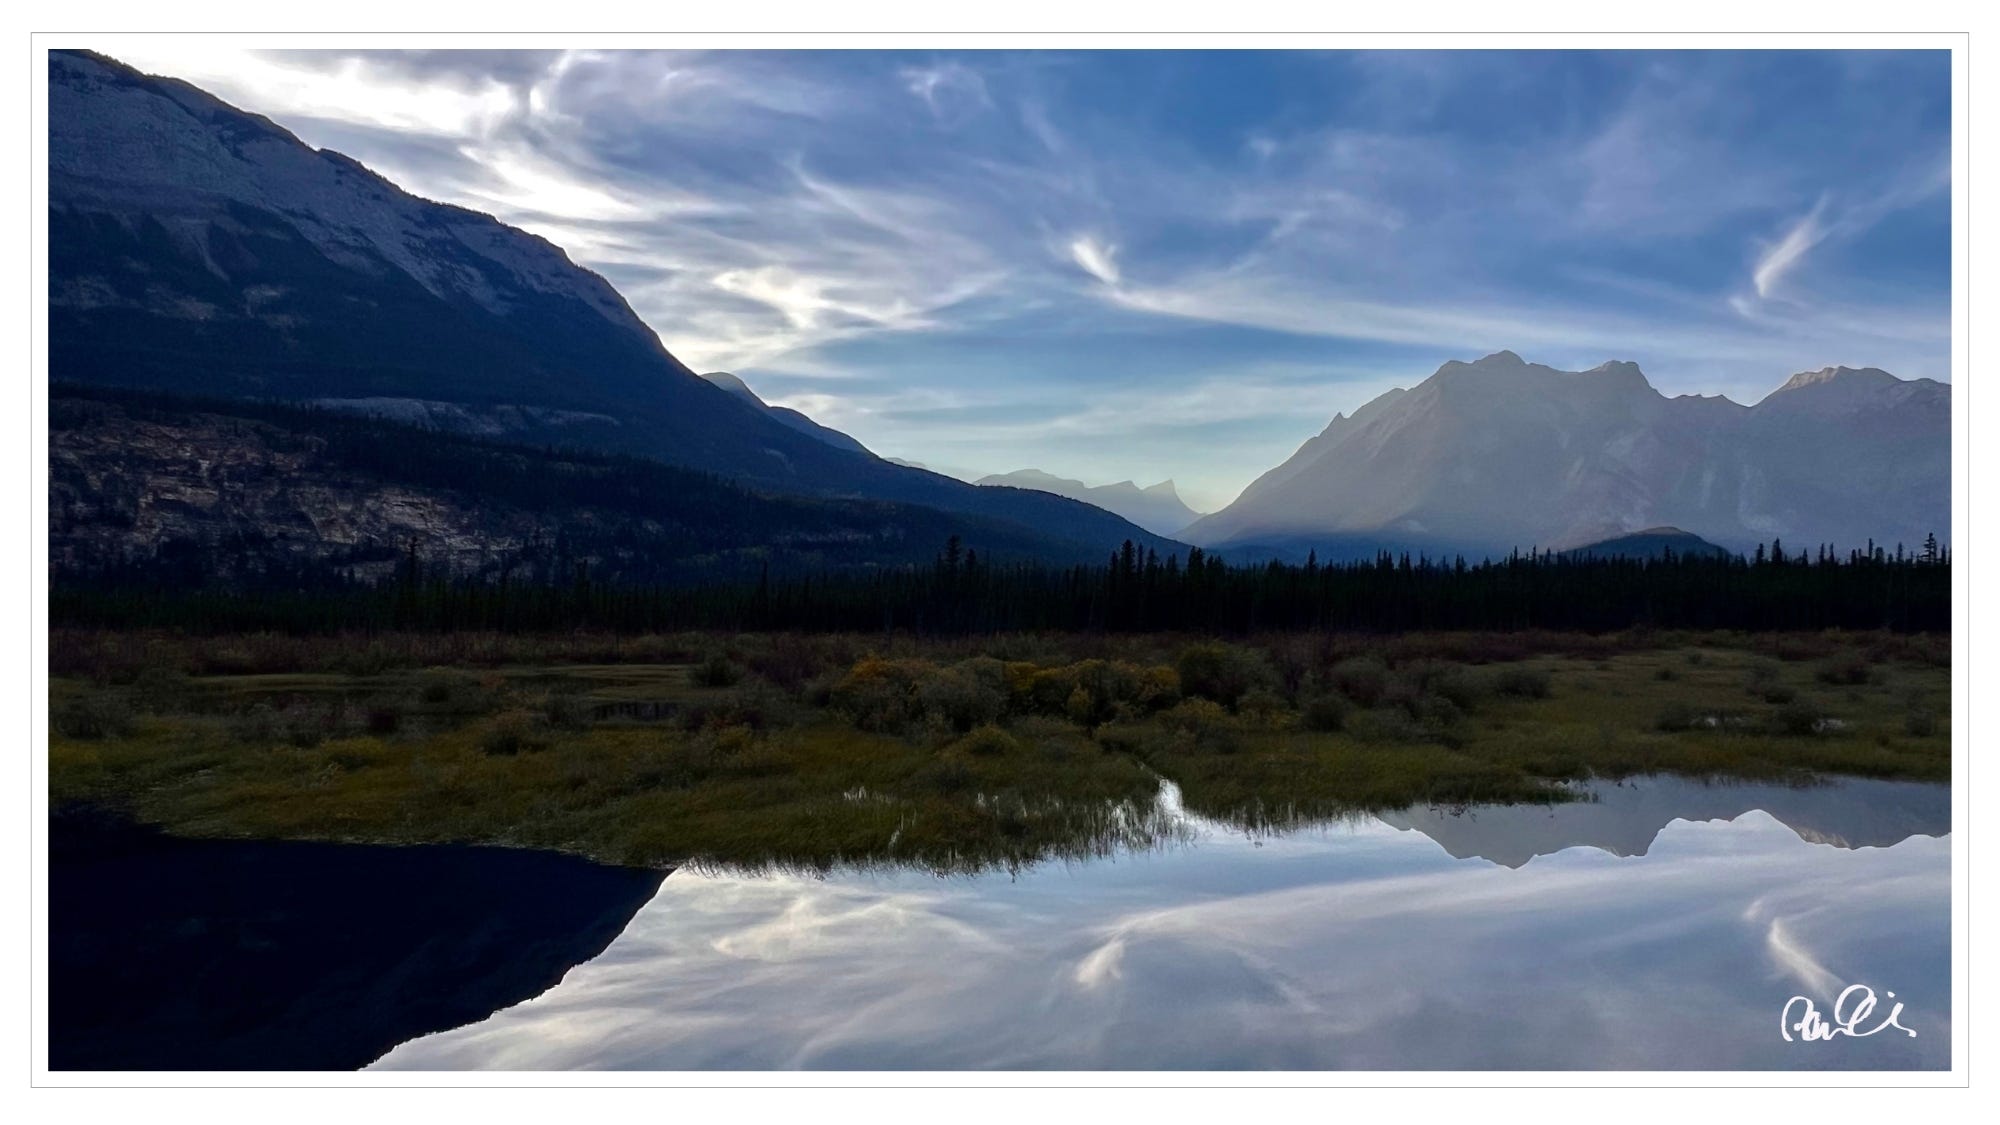 Glacier lake, water reflecting nearby mountains, clouds; Jasper National Park